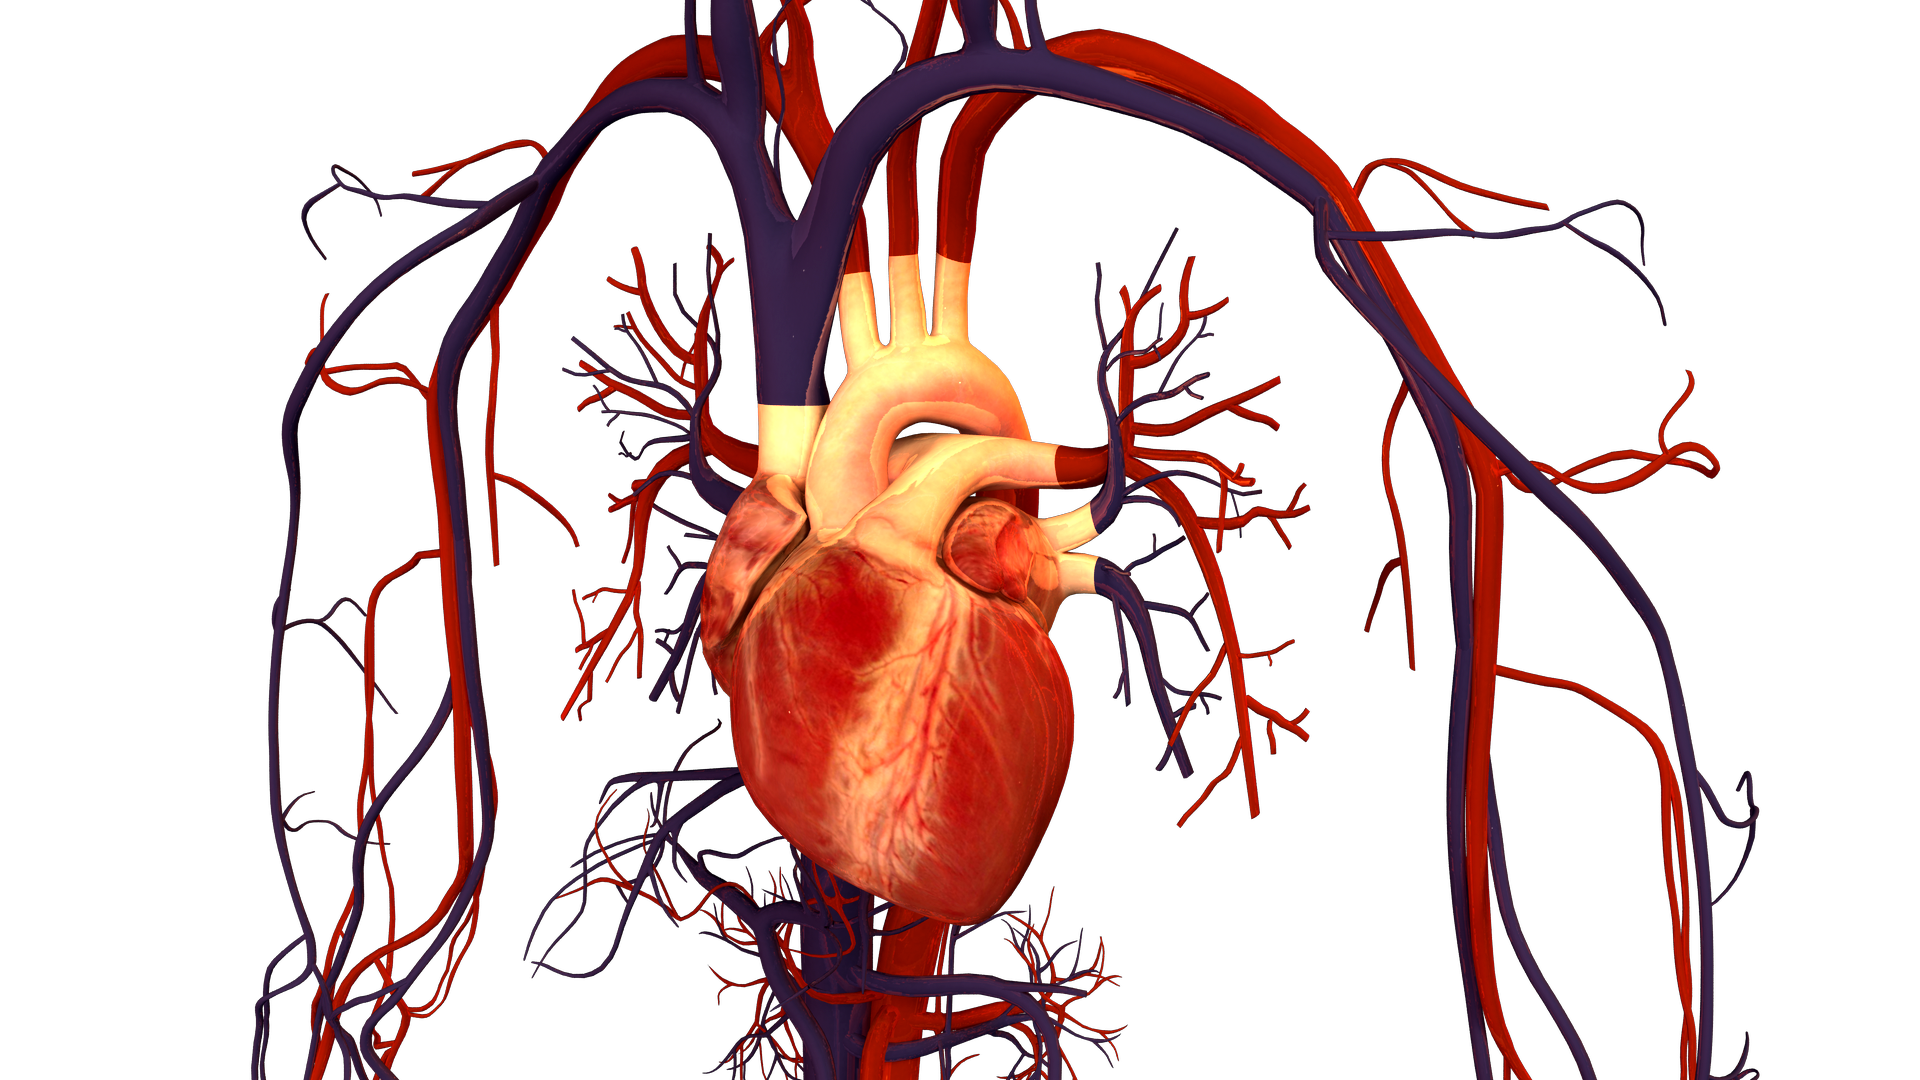 File:Human Heart and Circulatory System.png.